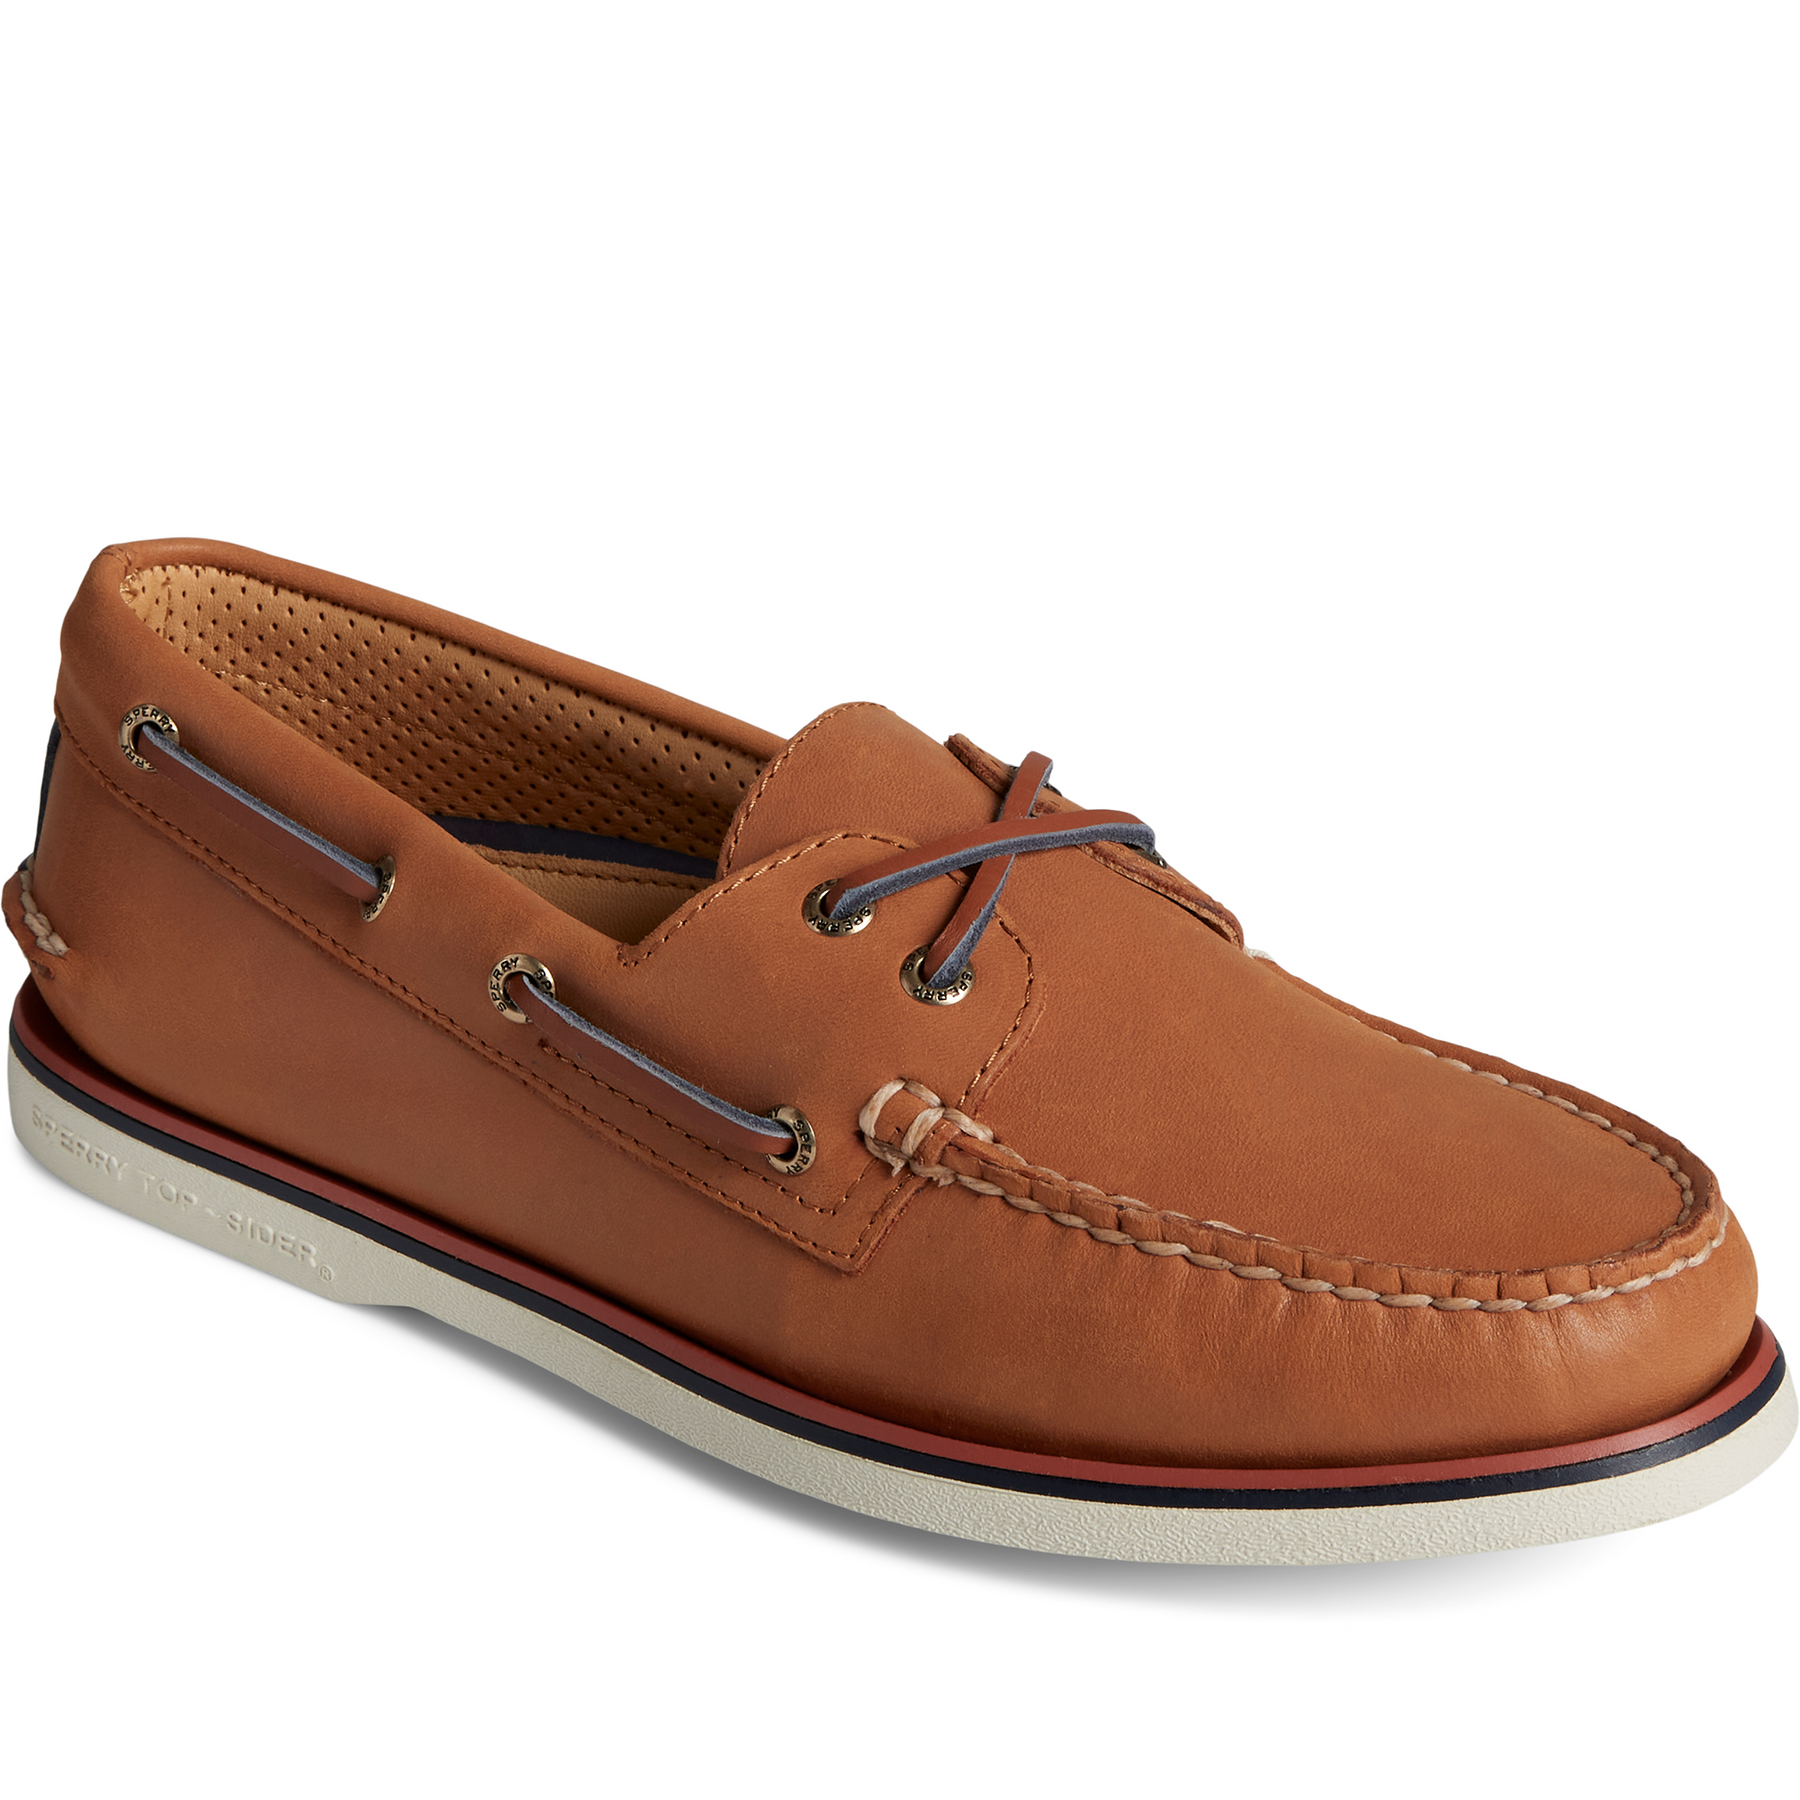 Sperry Men's Gold Cup Authentic Original 2-Eye Boat Shoe - Tan (STS25050)